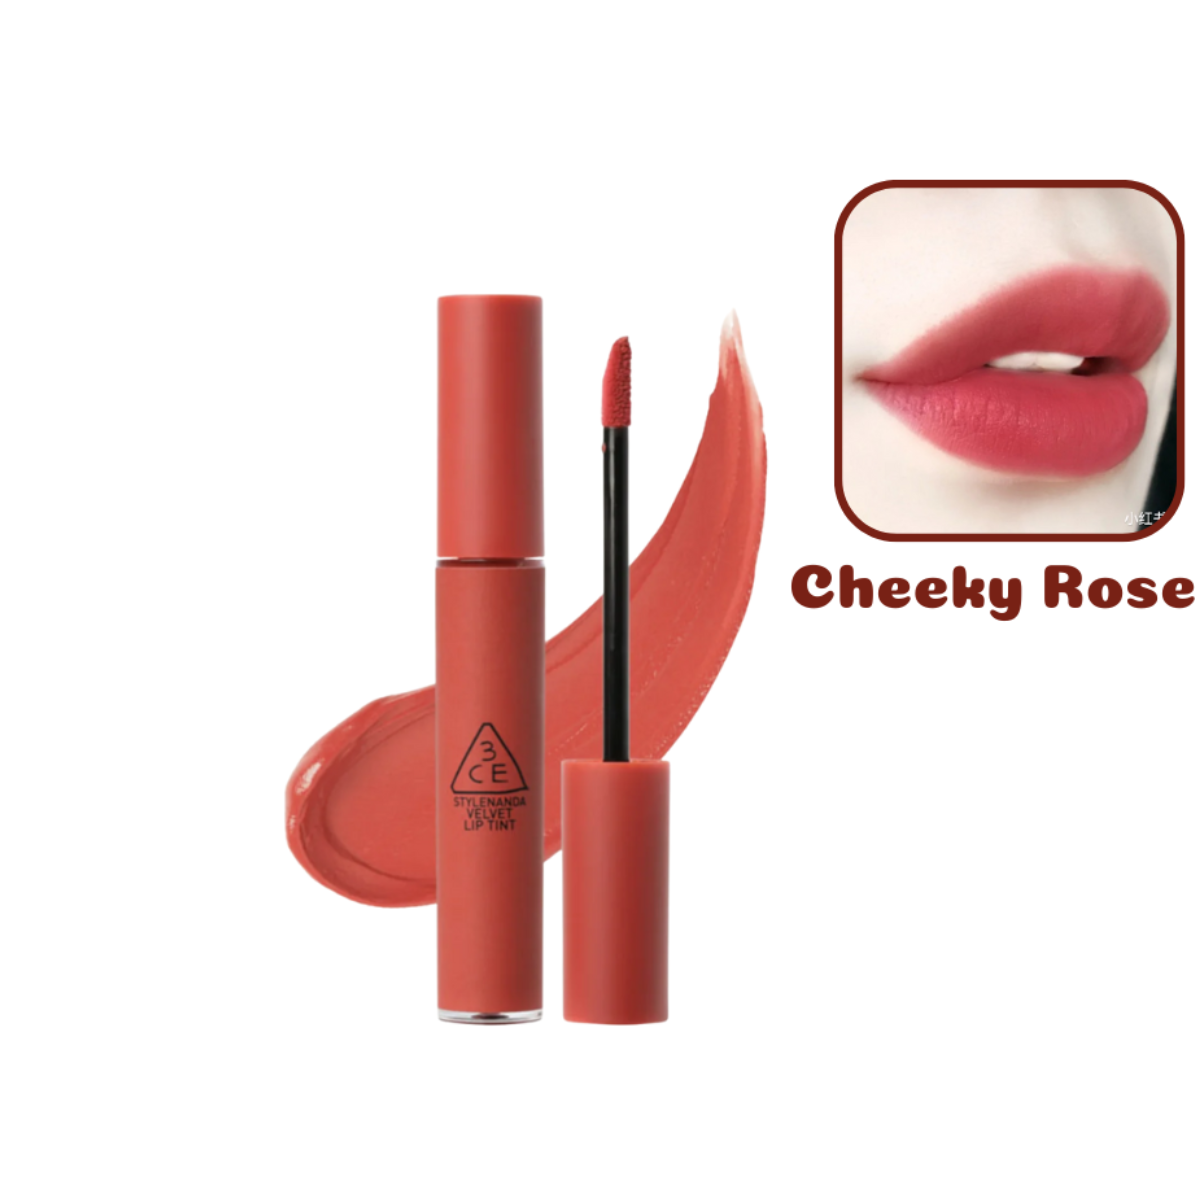 Son 3ce Cheeky Rose